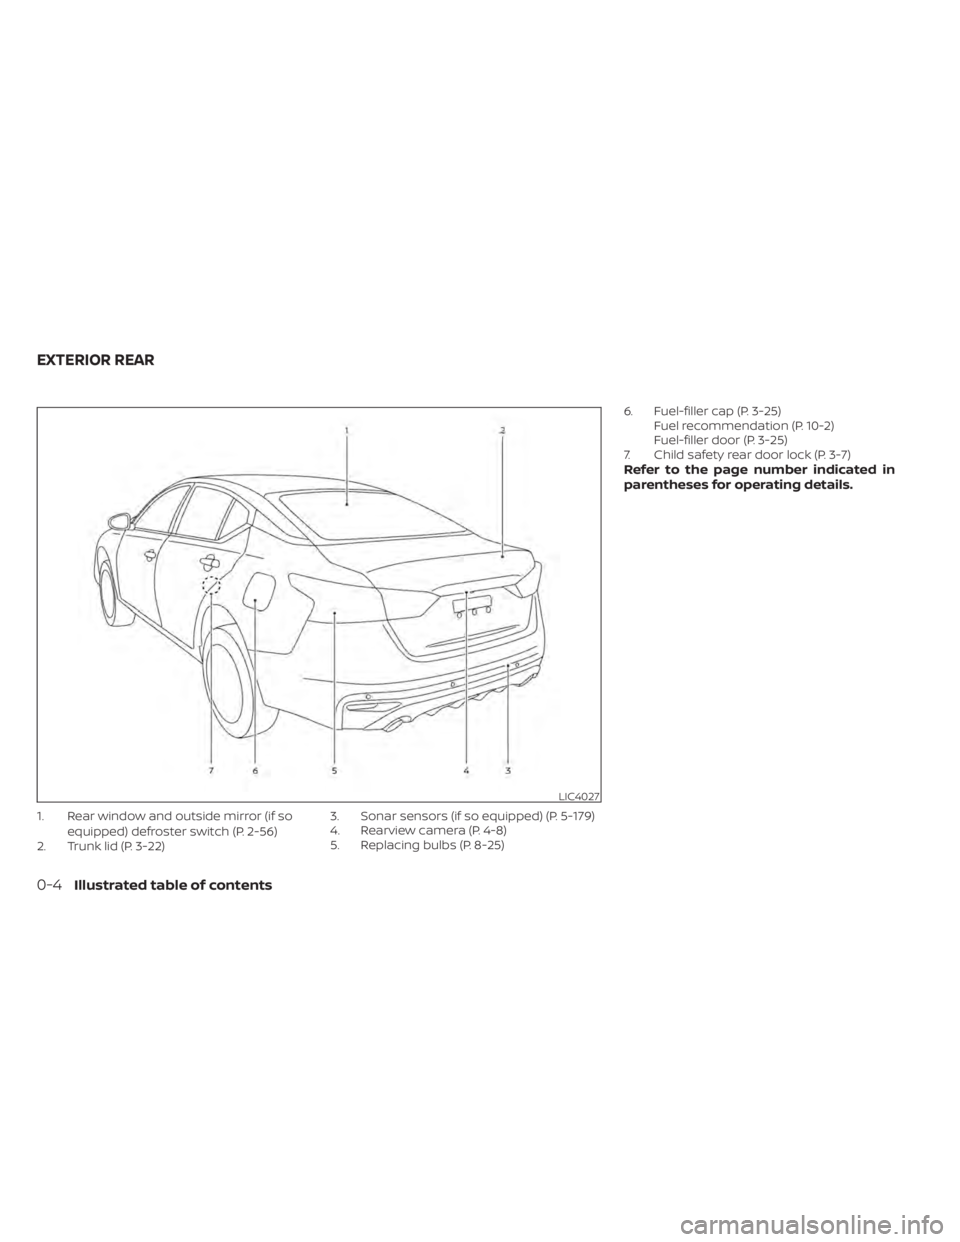 NISSAN ALTIMA 2023 User Guide 1. Rear window and outside mirror (if soequipped) defroster switch (P. 2-56)
2. Trunk lid (P. 3-22) 3. Sonar sensors (if so equipped) (P. 5-179)
4. Rearview camera (P. 4-8)
5. Replacing bulbs (P. 8-25